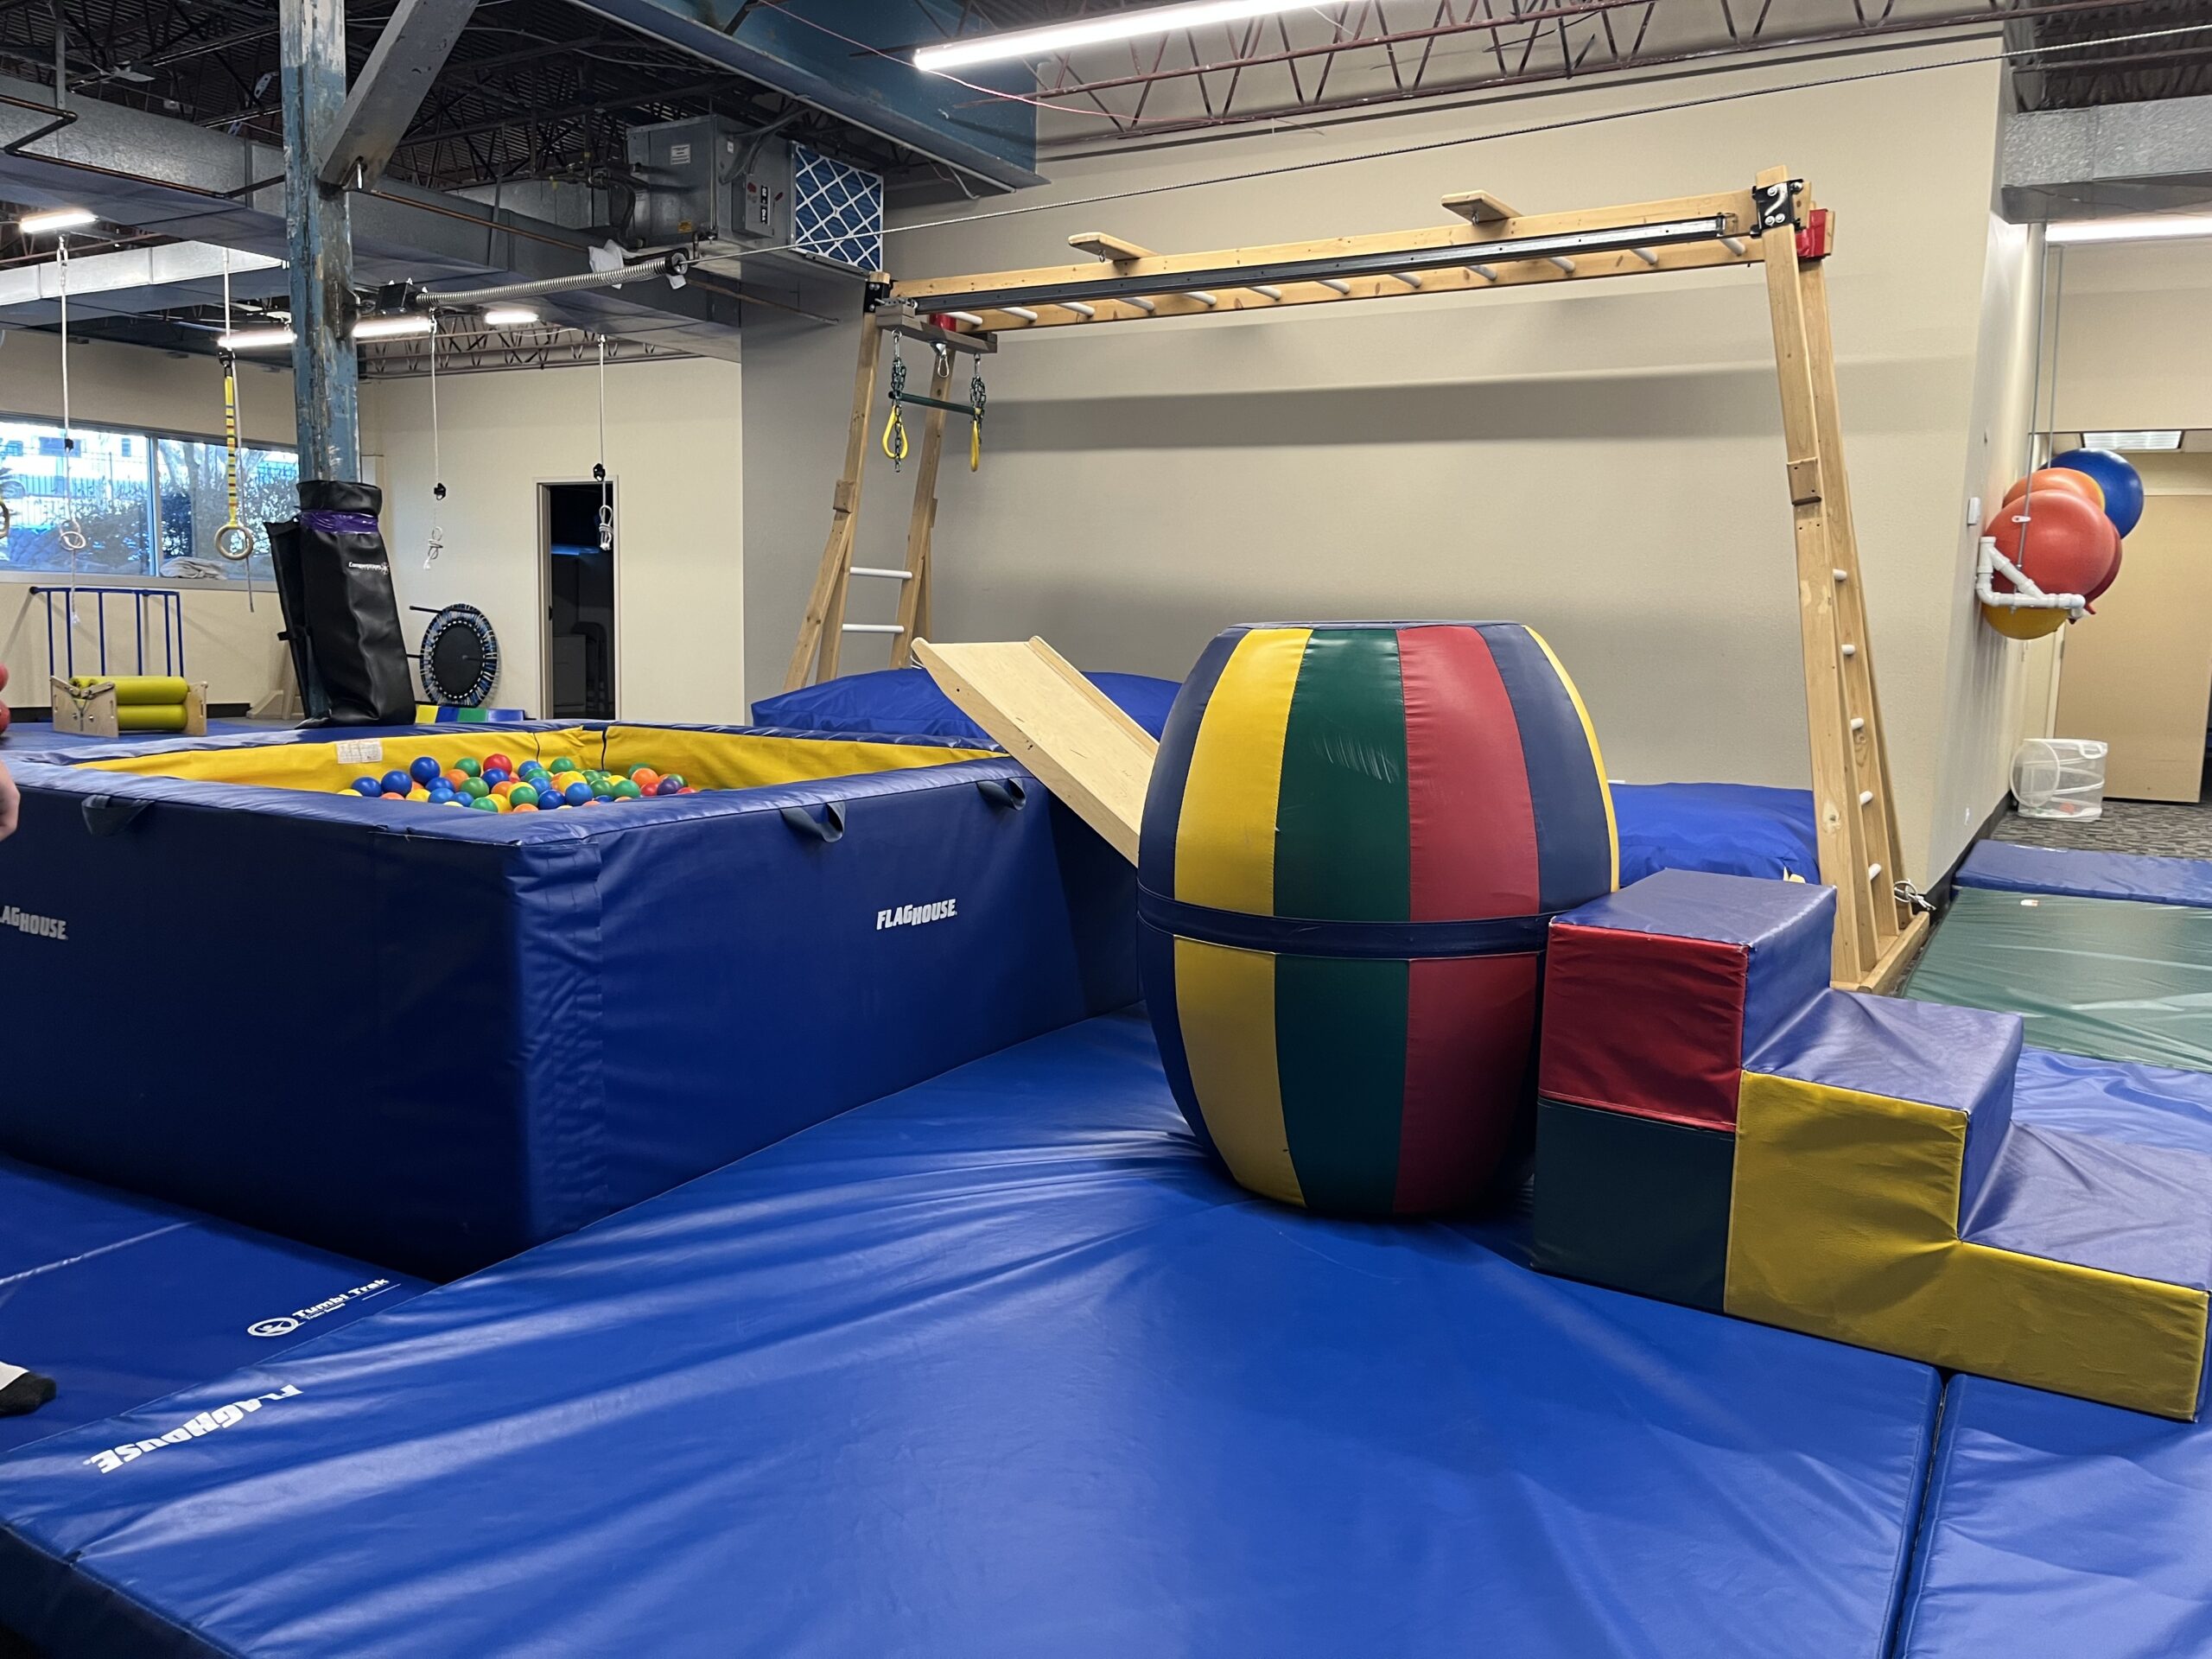 Gym with mats on the floor, ball pit, and play equipment